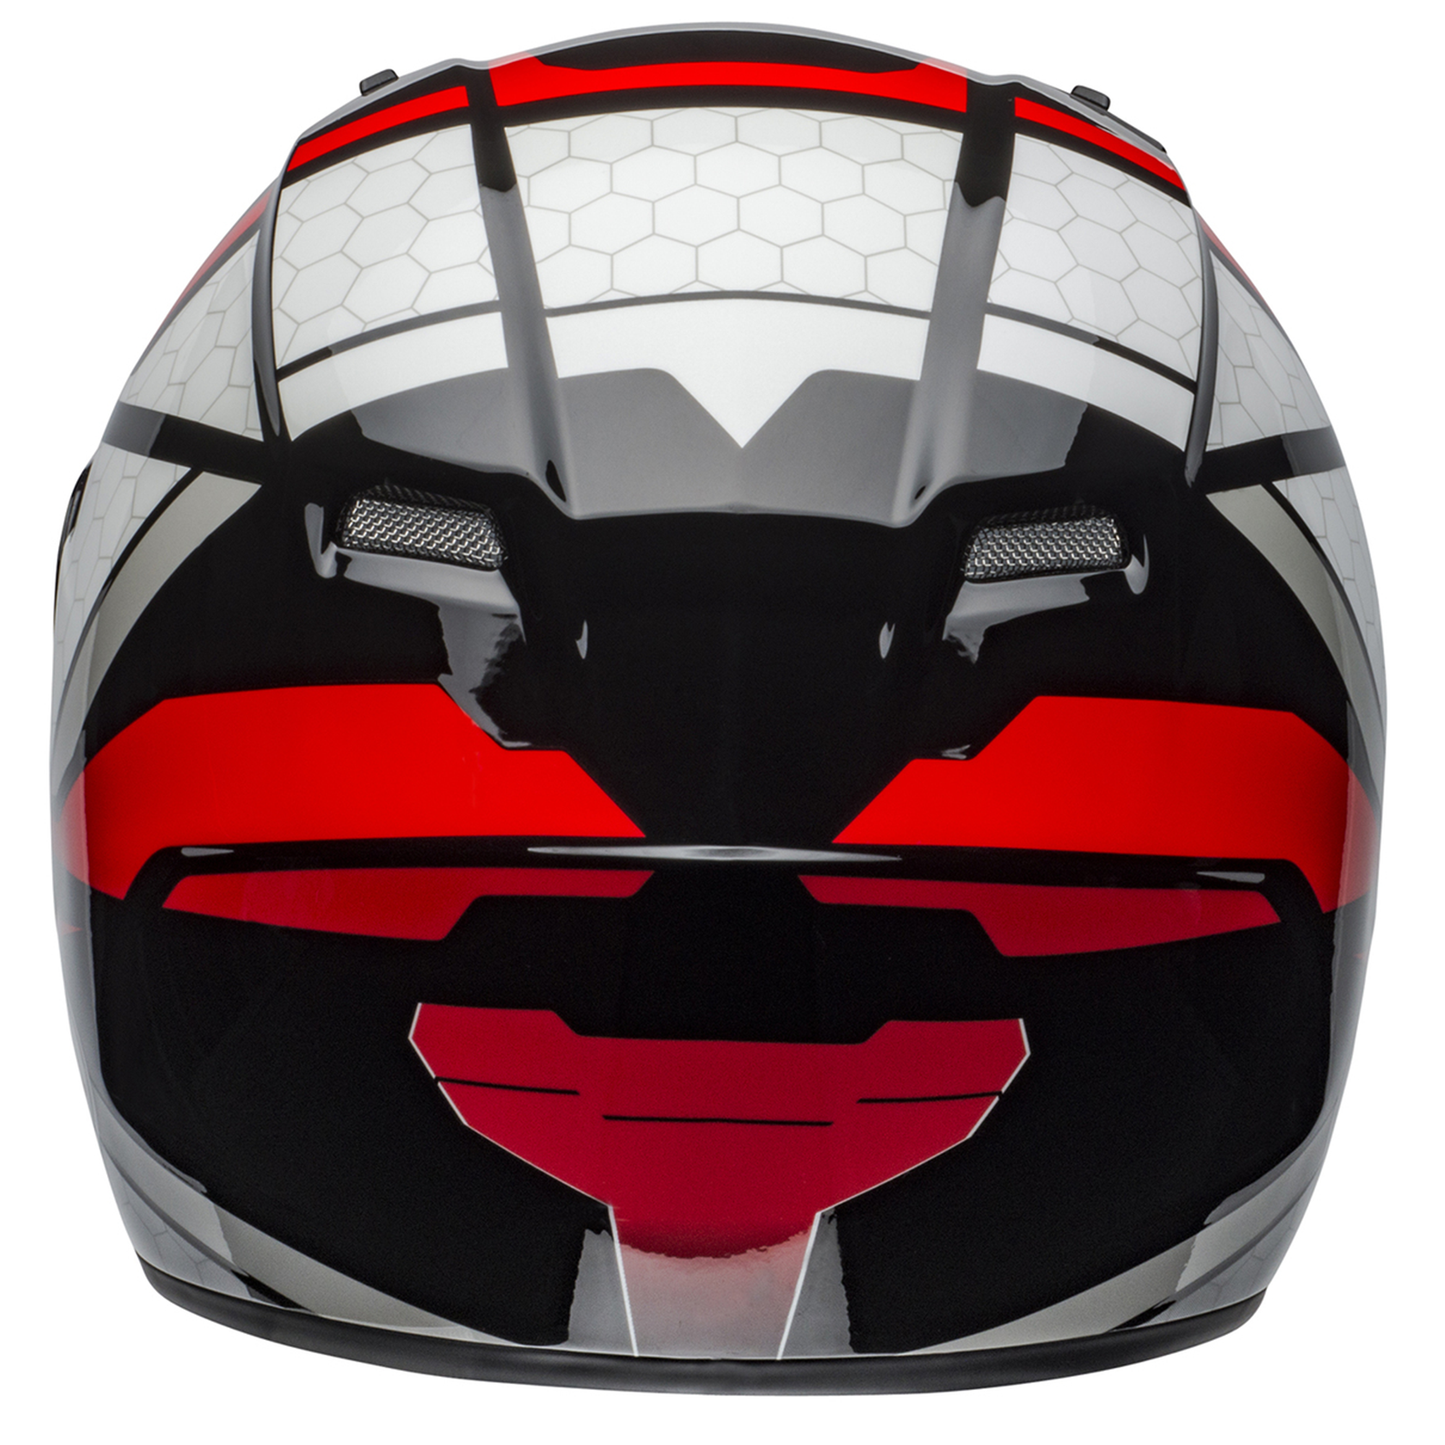 Bell Qualifier - Flare Gloss Black/Red